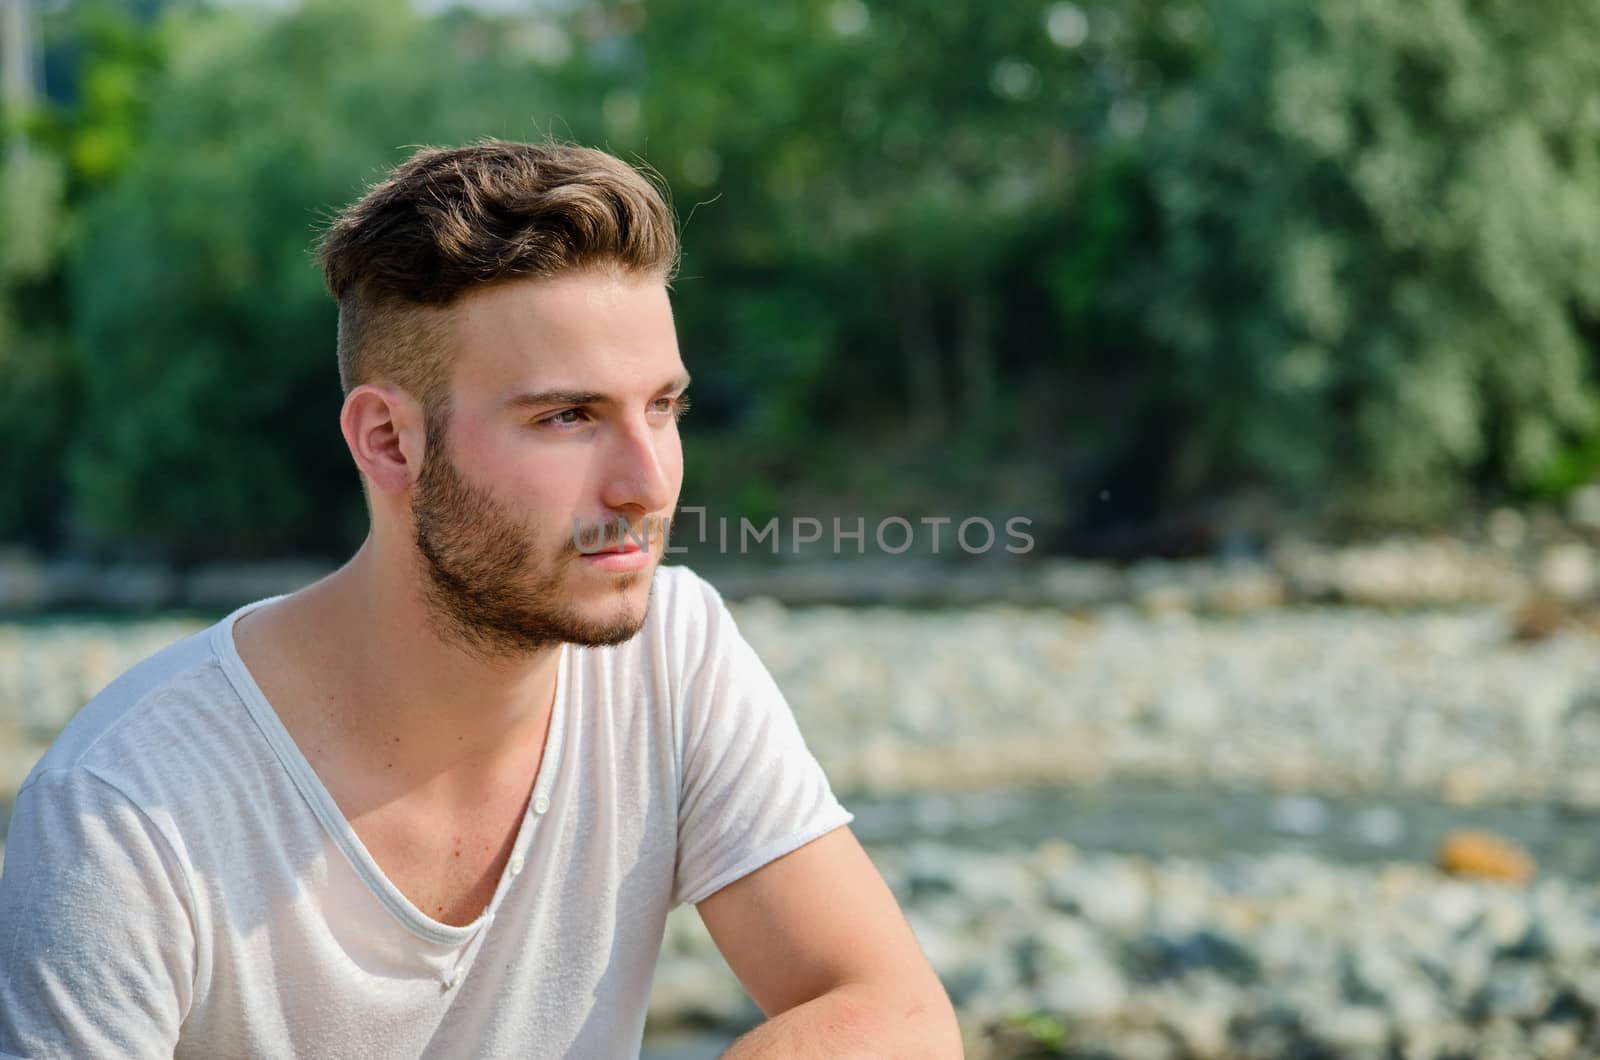 Portrait of handsome young man outdoors in nature, looking to a side